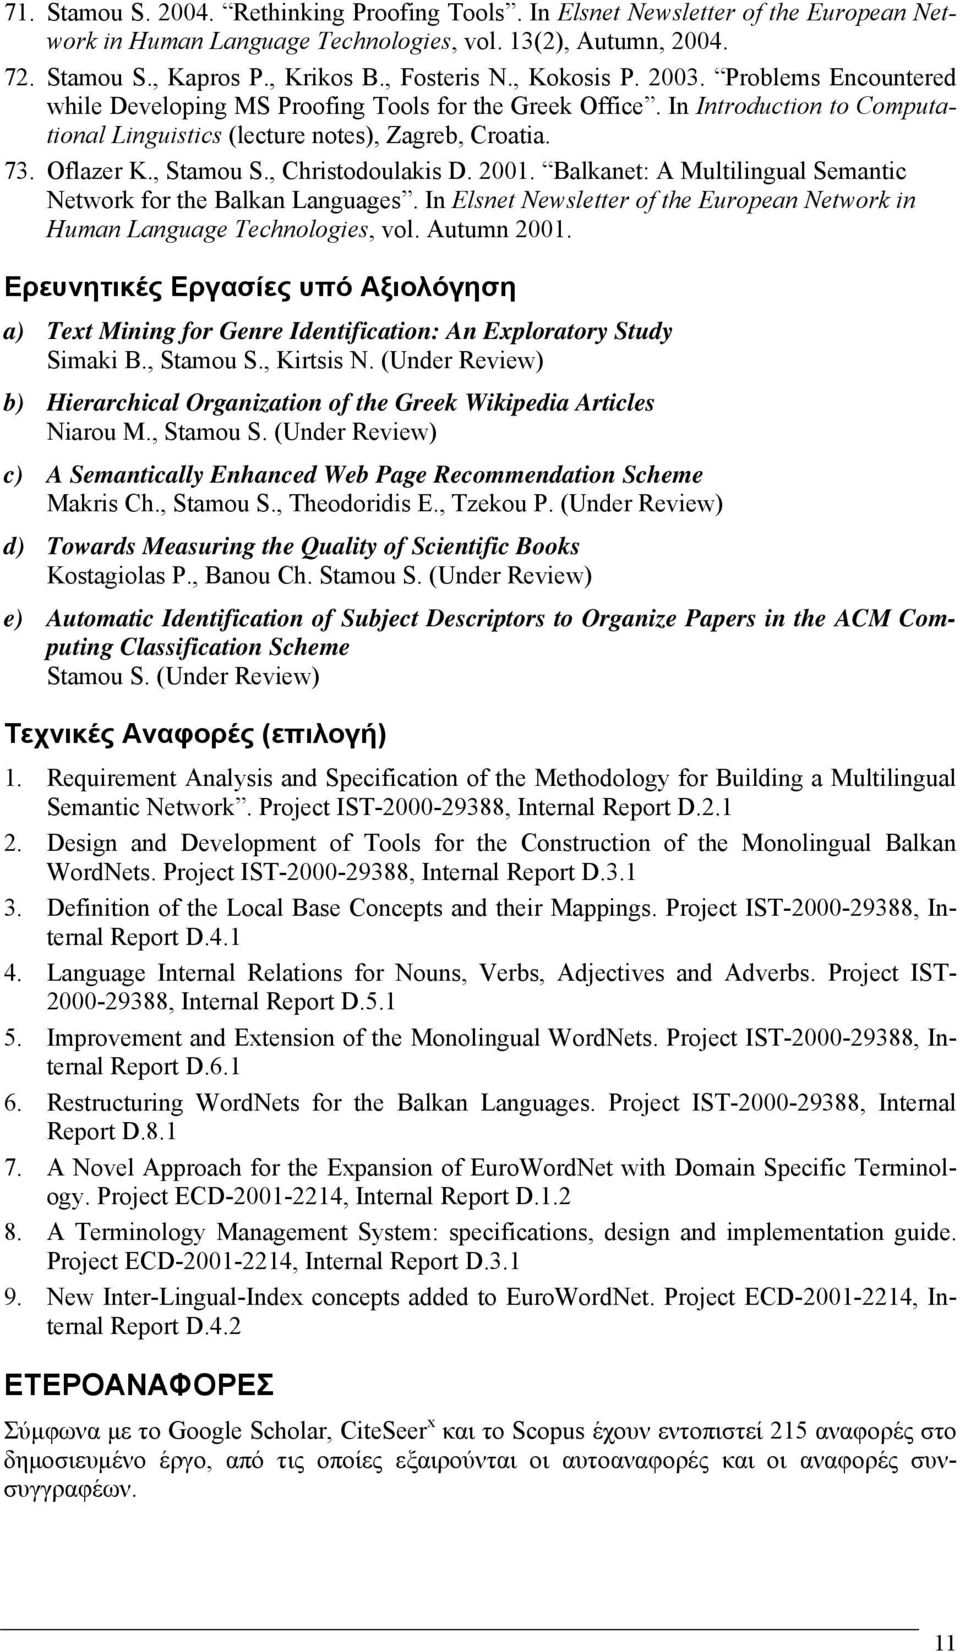 , Stamou S., Christodoulakis D. 2001. Balkanet: A Multilingual Semantic Network for the Balkan Languages. In Elsnet Newsletter of the European Network in Human Language Technologies, vol. Autumn 2001.